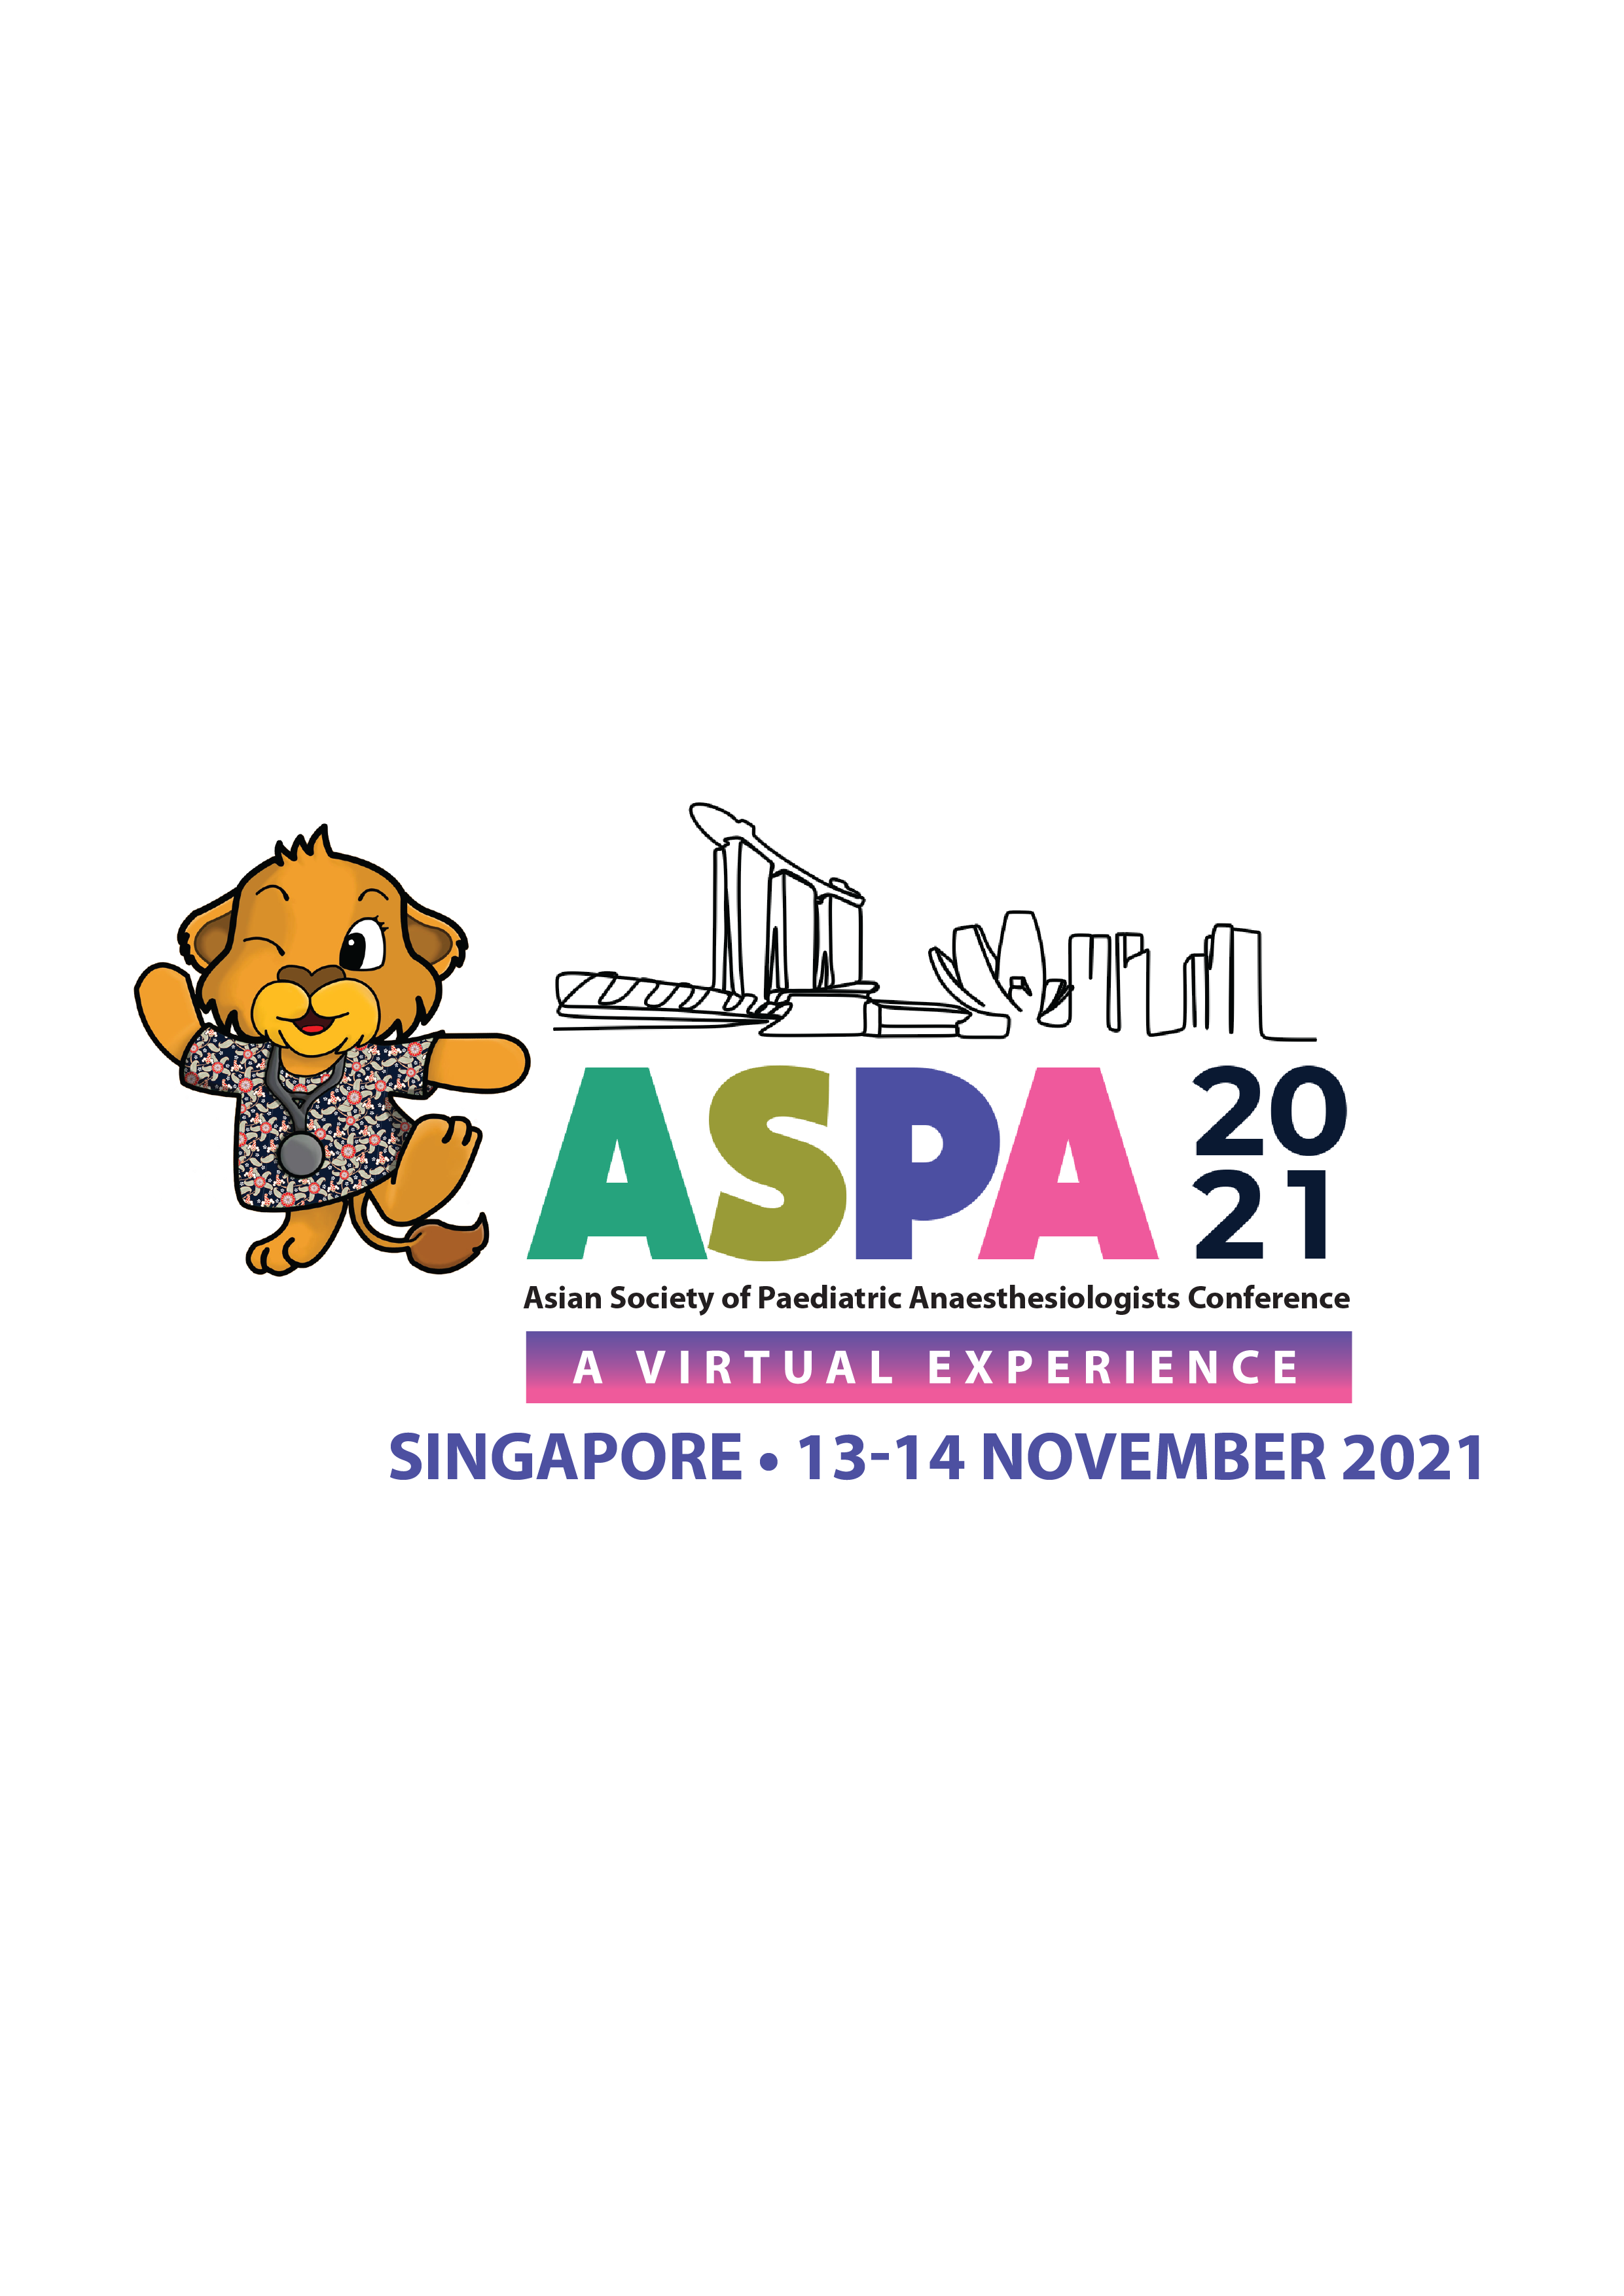 Asian Society of Paediatric Anaesthesiologists Conference - ASPAC 2021